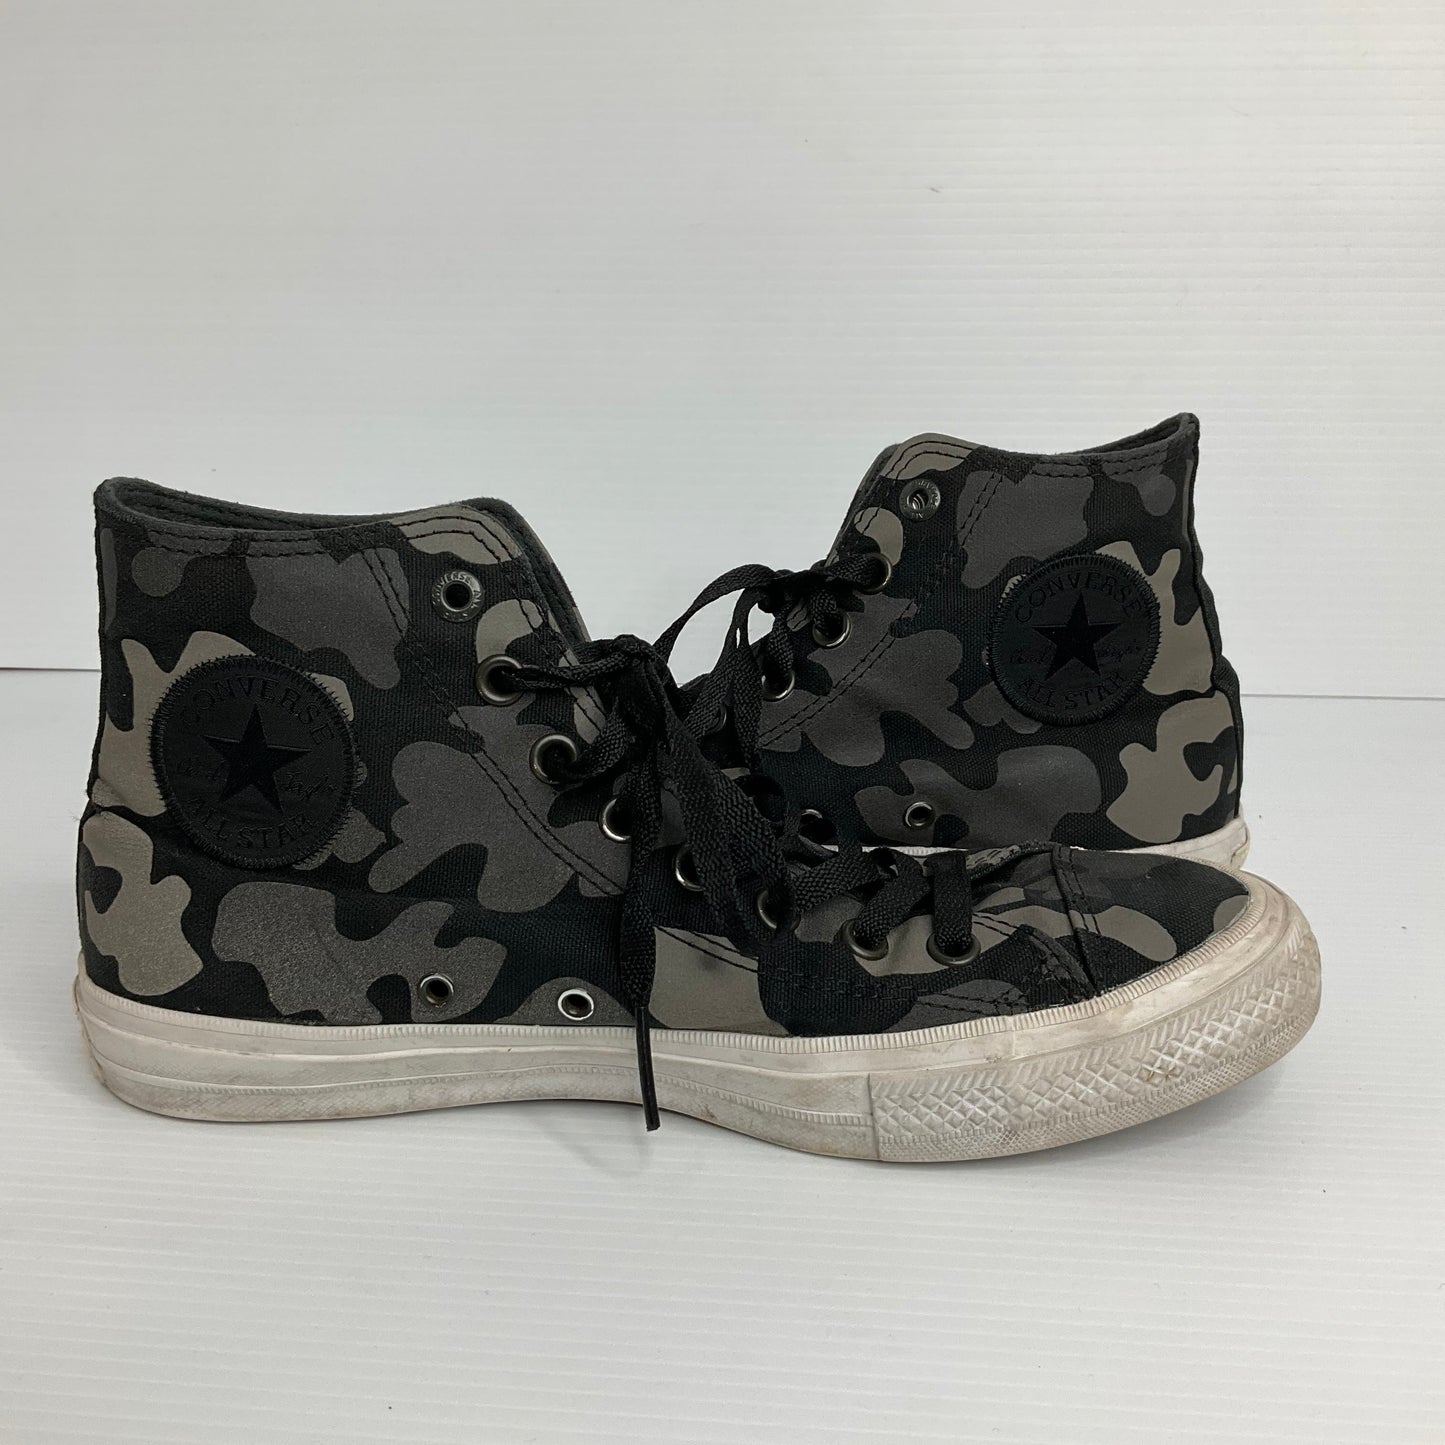 Camouflage Print Shoes Sneakers Converse, Size 10